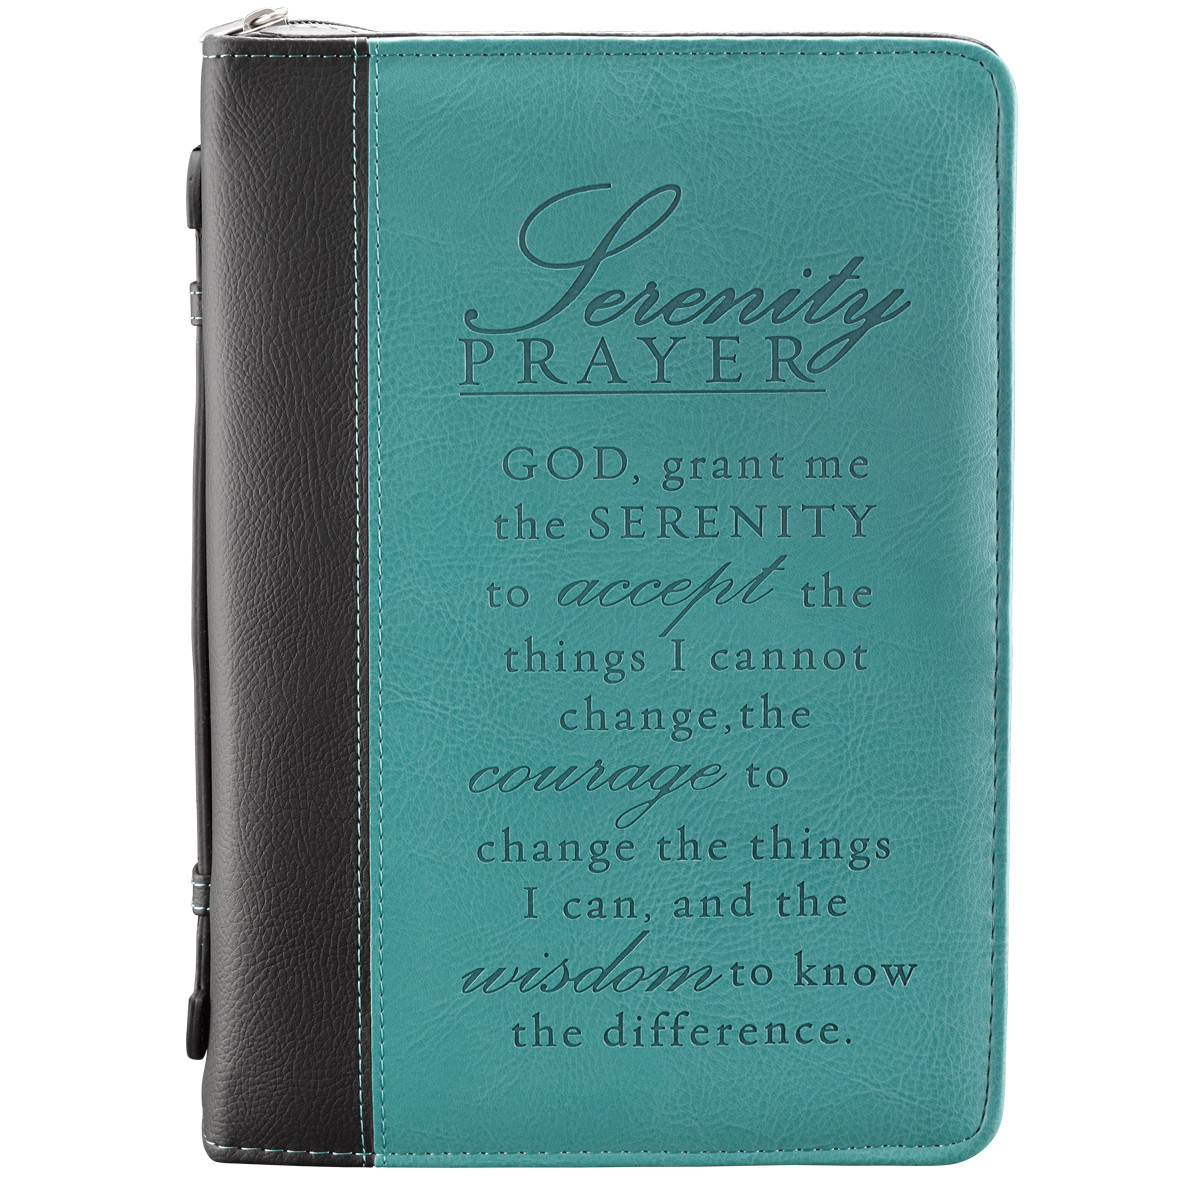 Serenity Prayer Two-tone Aqua Faux Leather Bible Cover